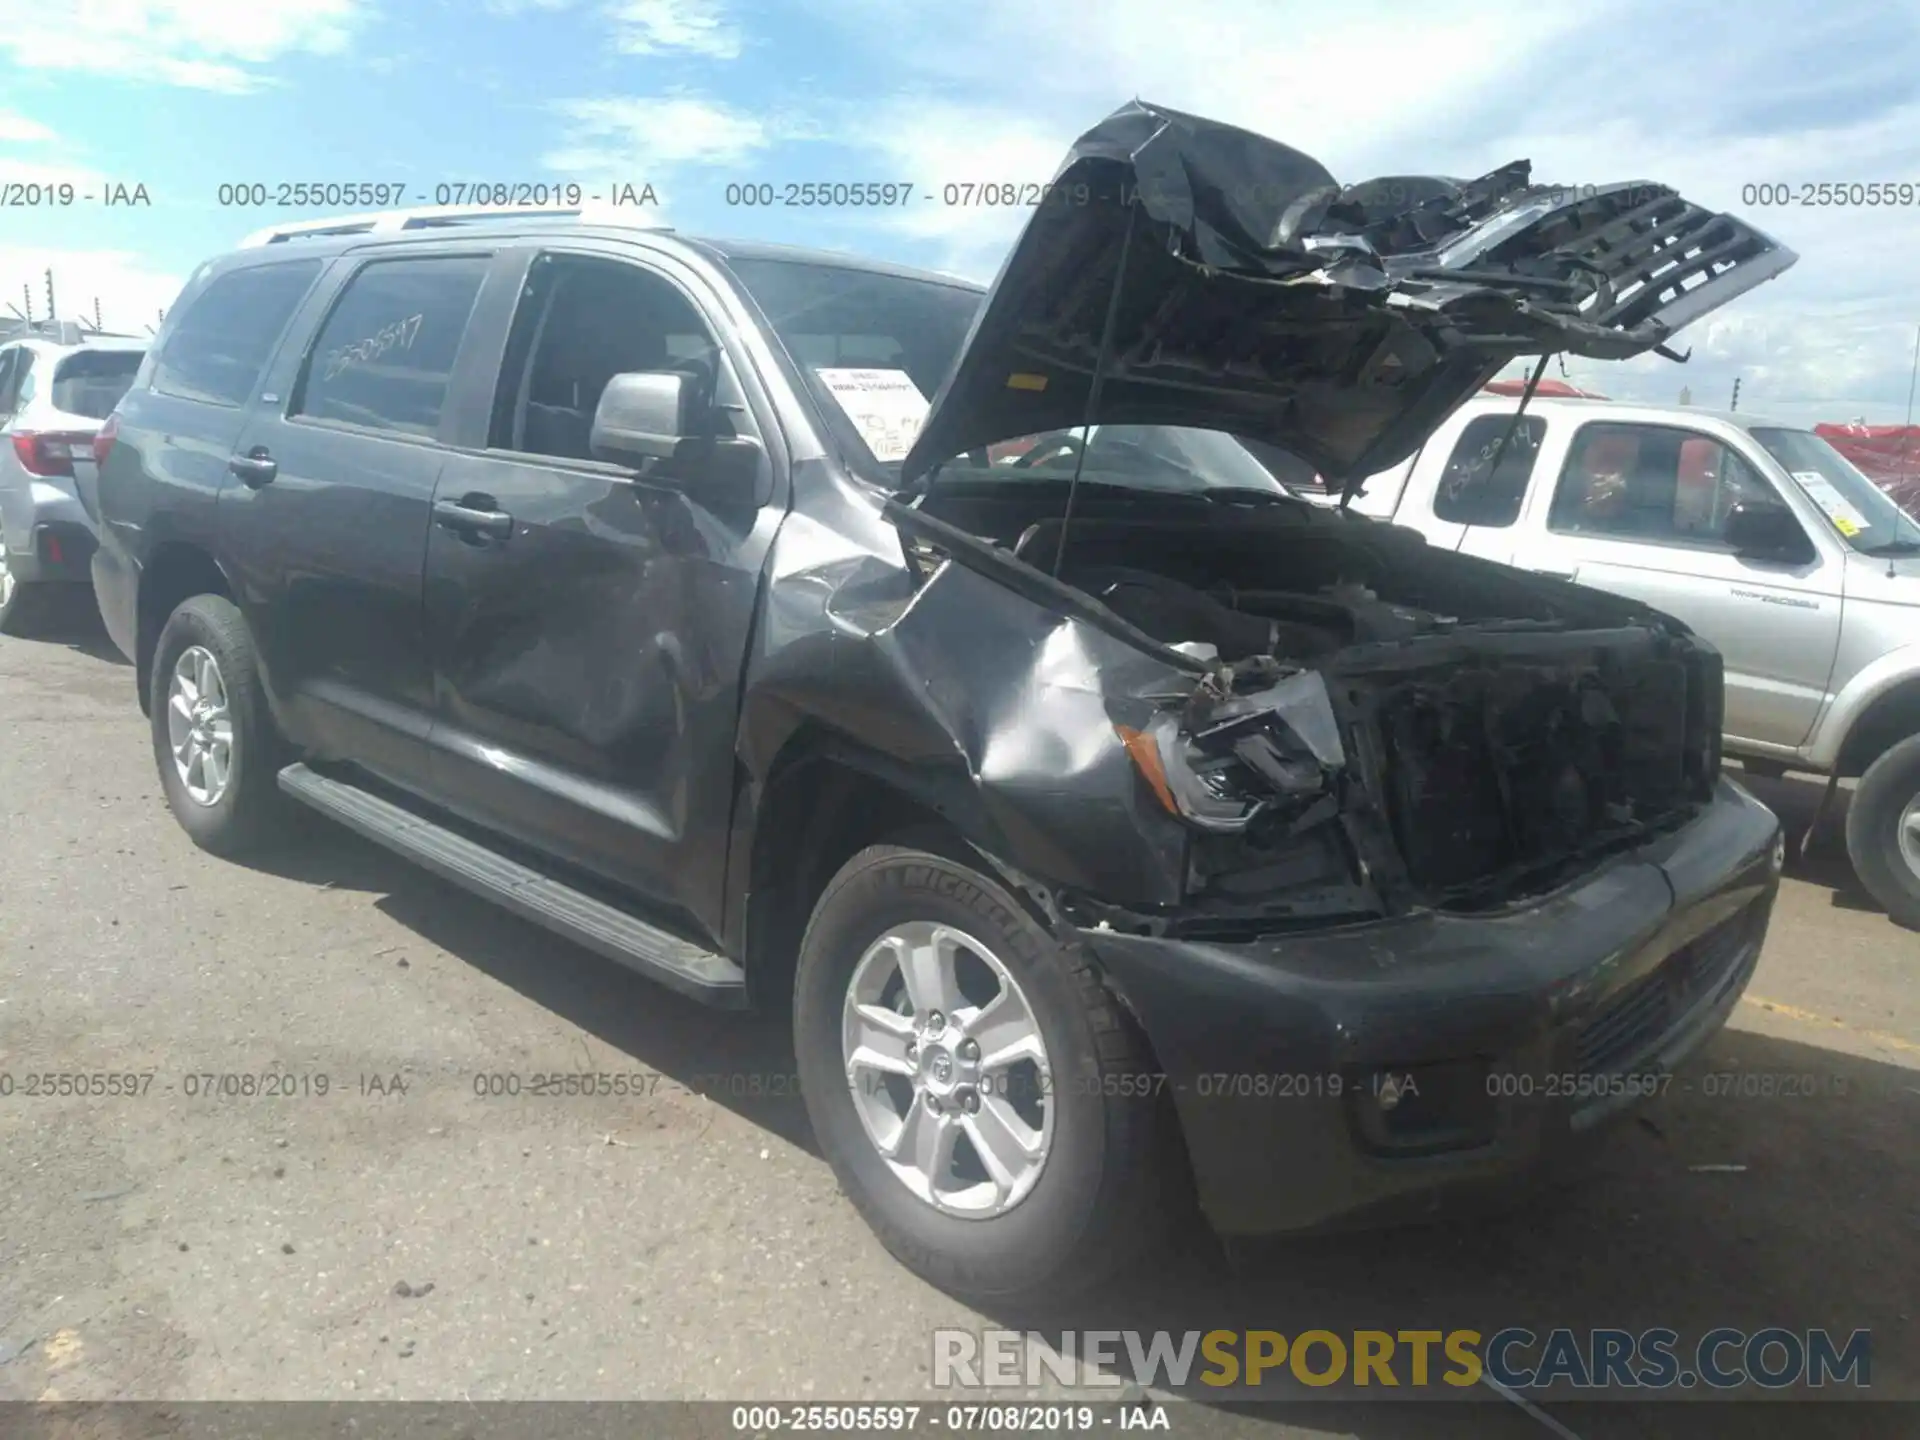 1 Photograph of a damaged car 5TDBY5G1XKS168628 TOYOTA SEQUOIA 2019